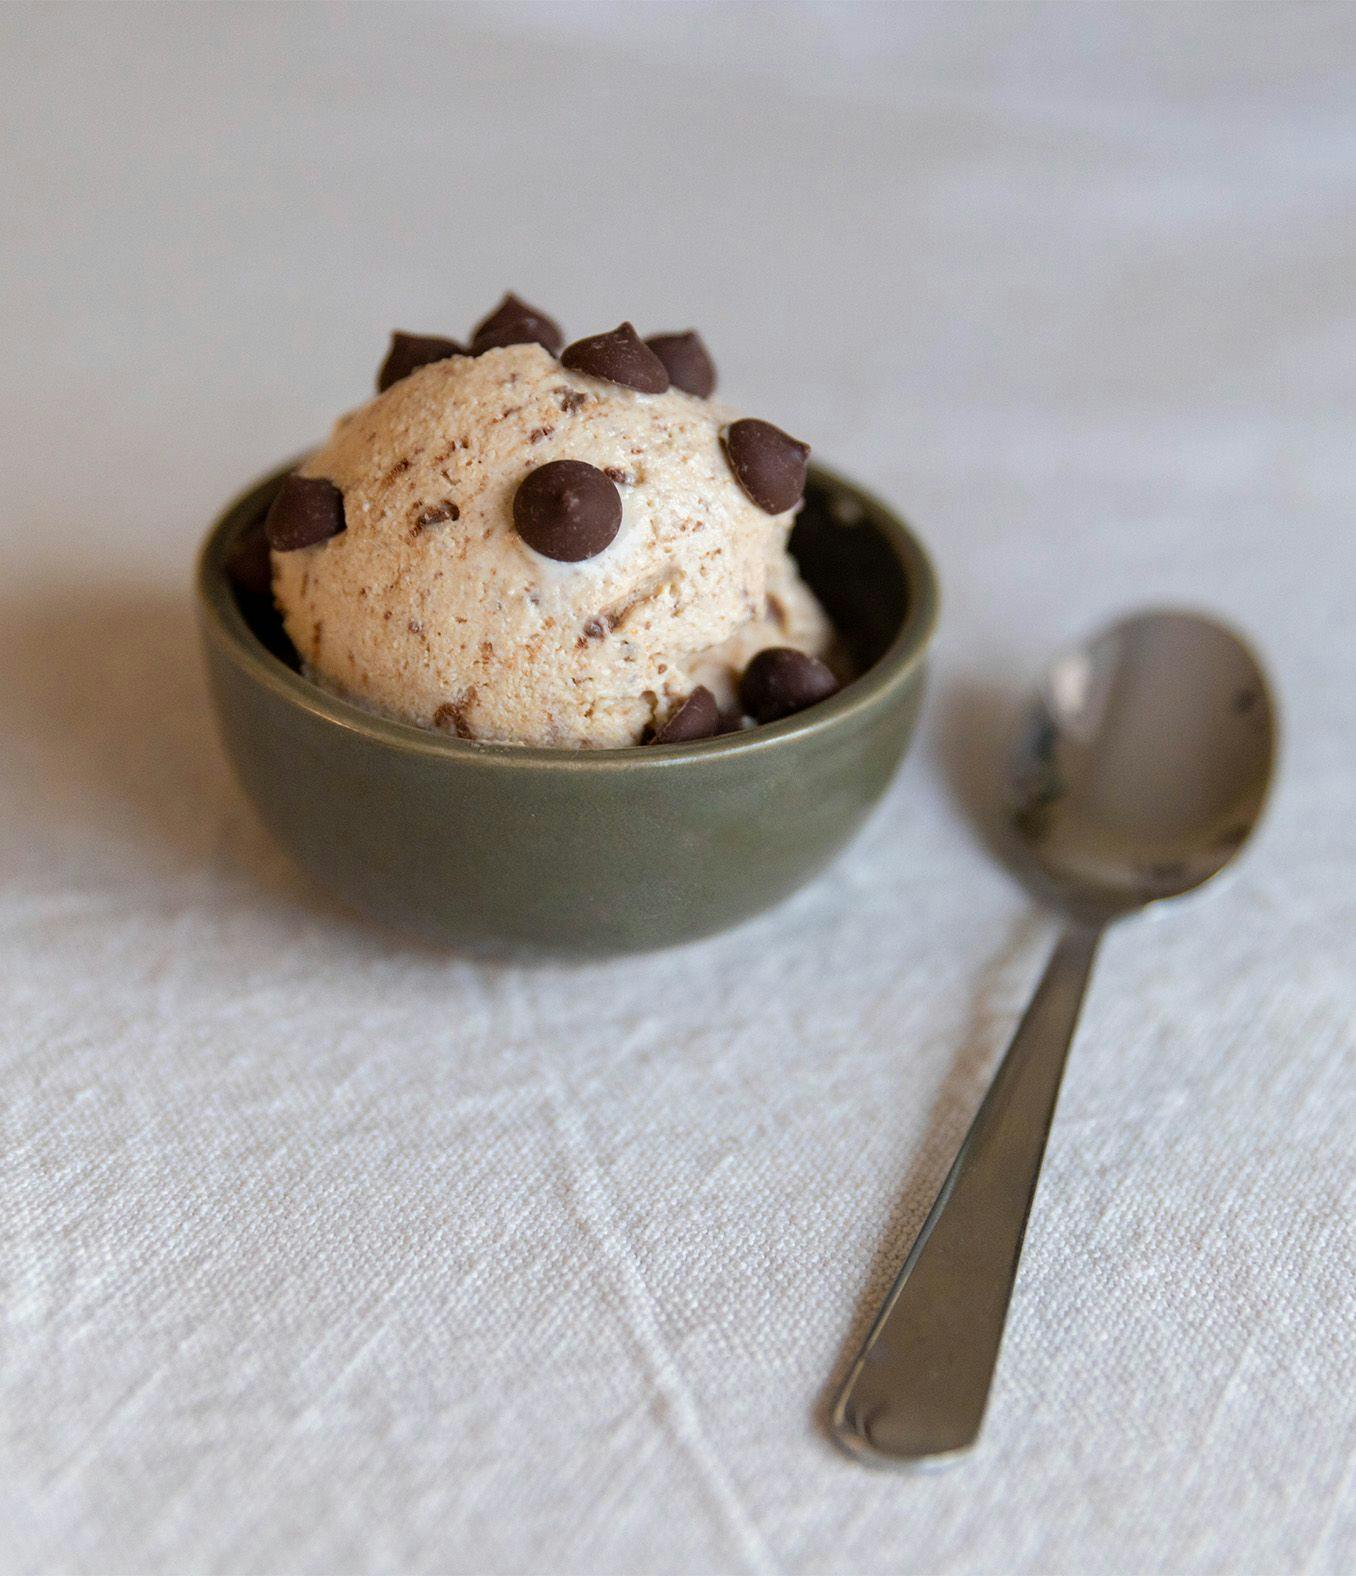 Scoop of cottage cheese ice cream in a dish with chocolate chips and spoon.